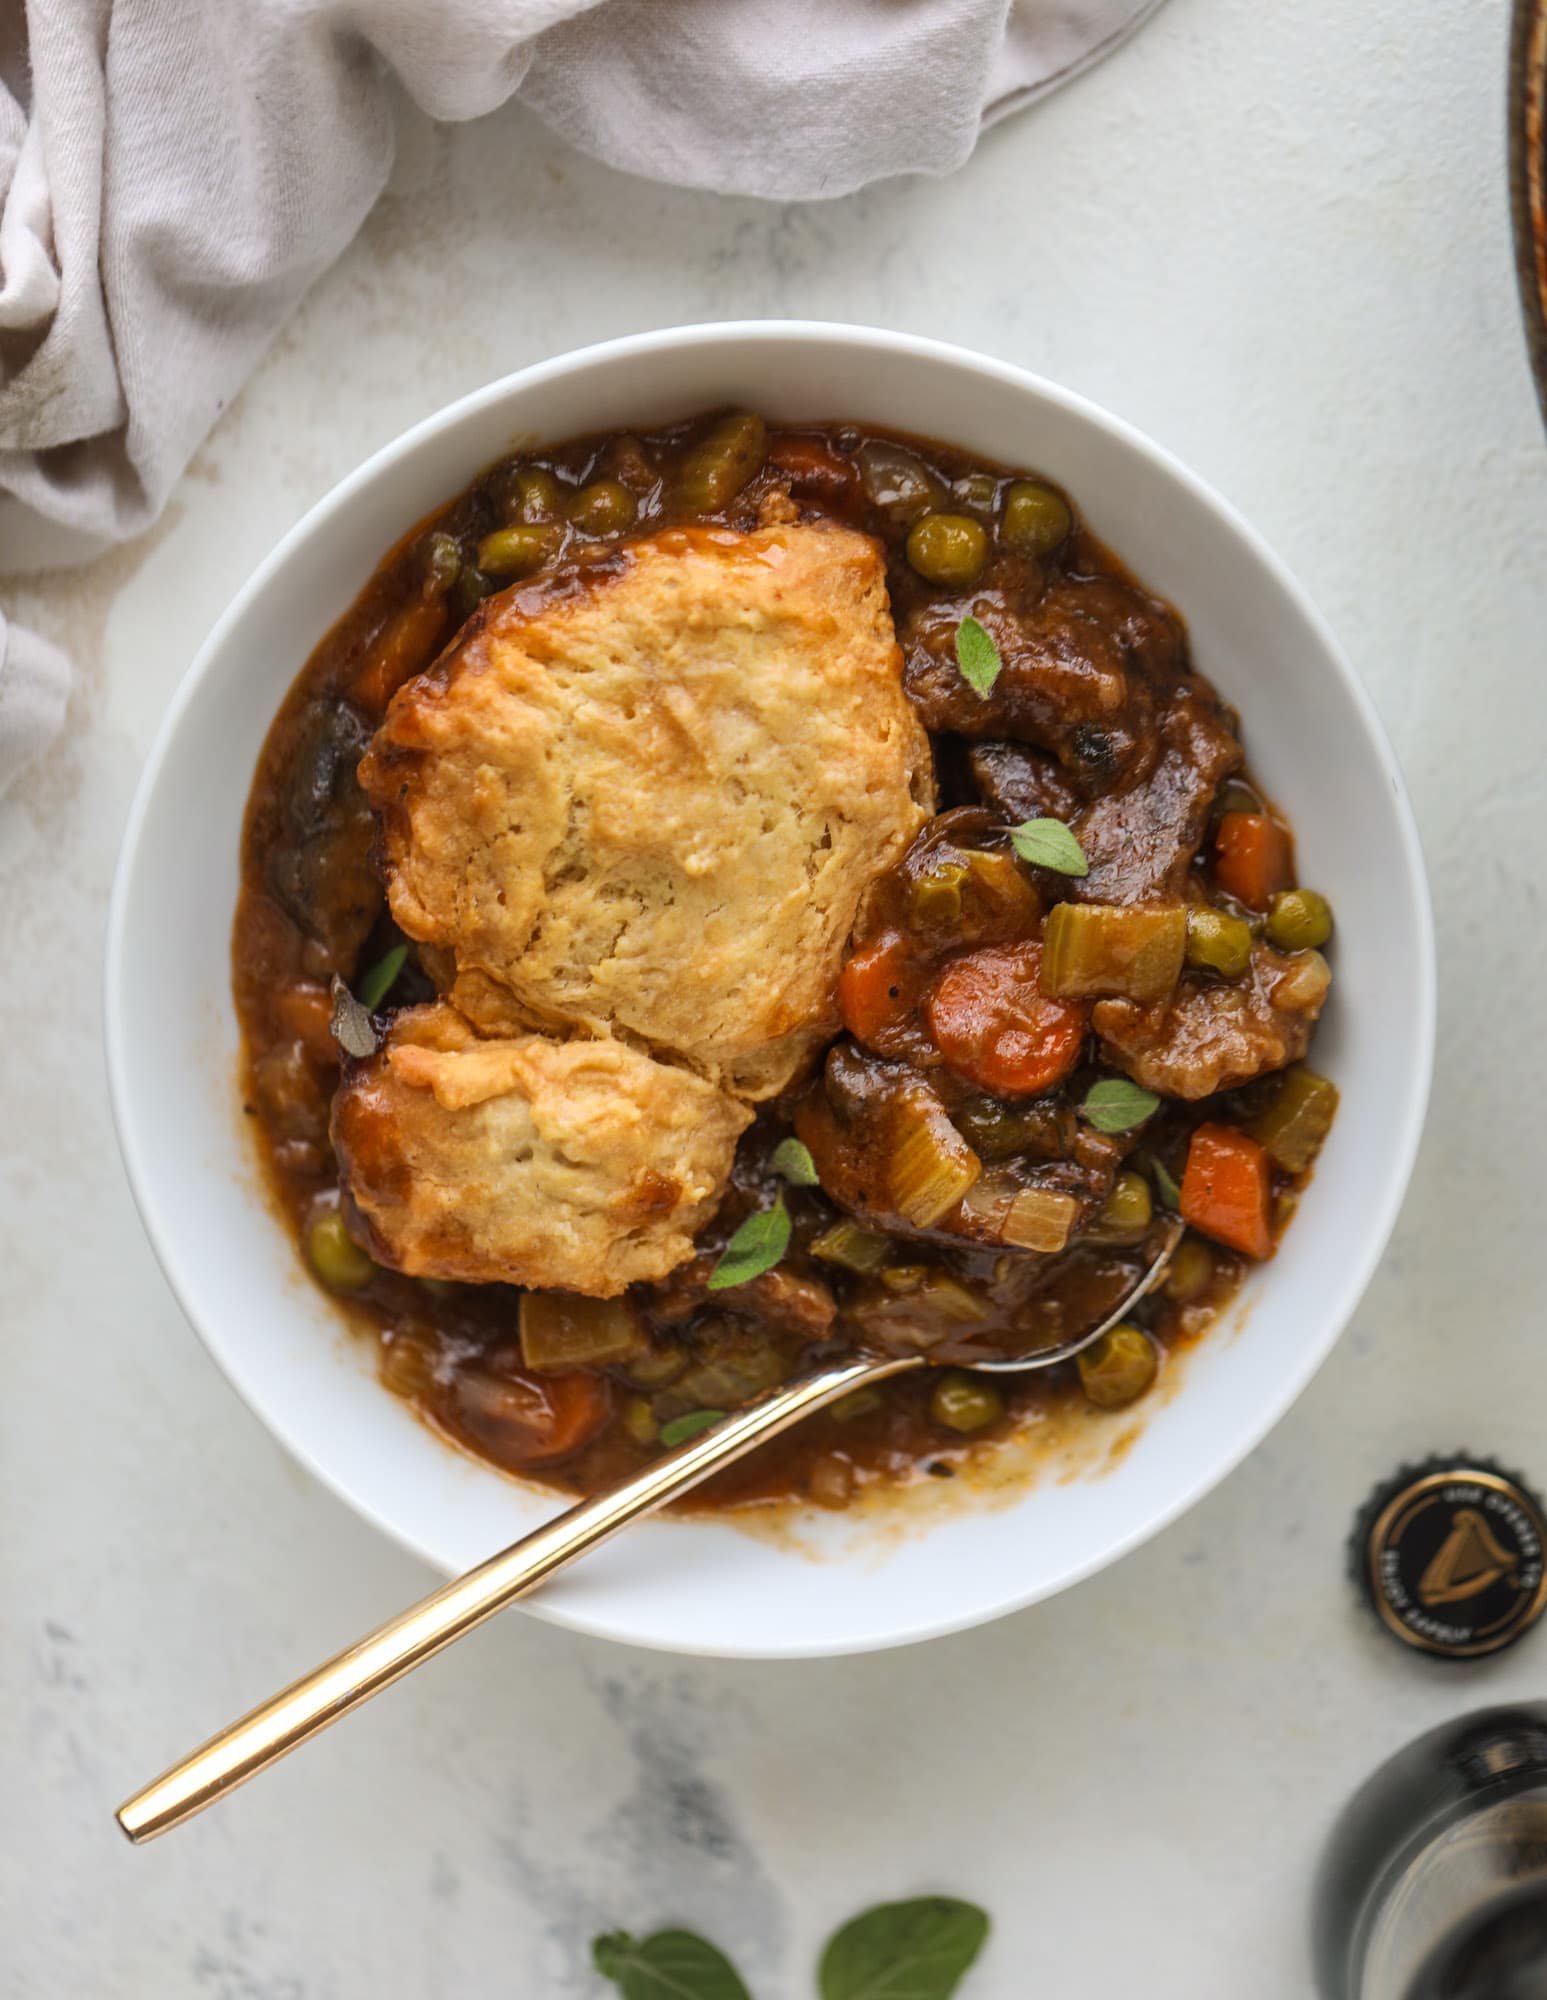  A perfect cold weather comfort food meal, Guiness pot pie has tender, fall-apart beef, lots of vegetables and is topped with buttery beer bread biscuits! I howsweeteats.com #guinness #potpie